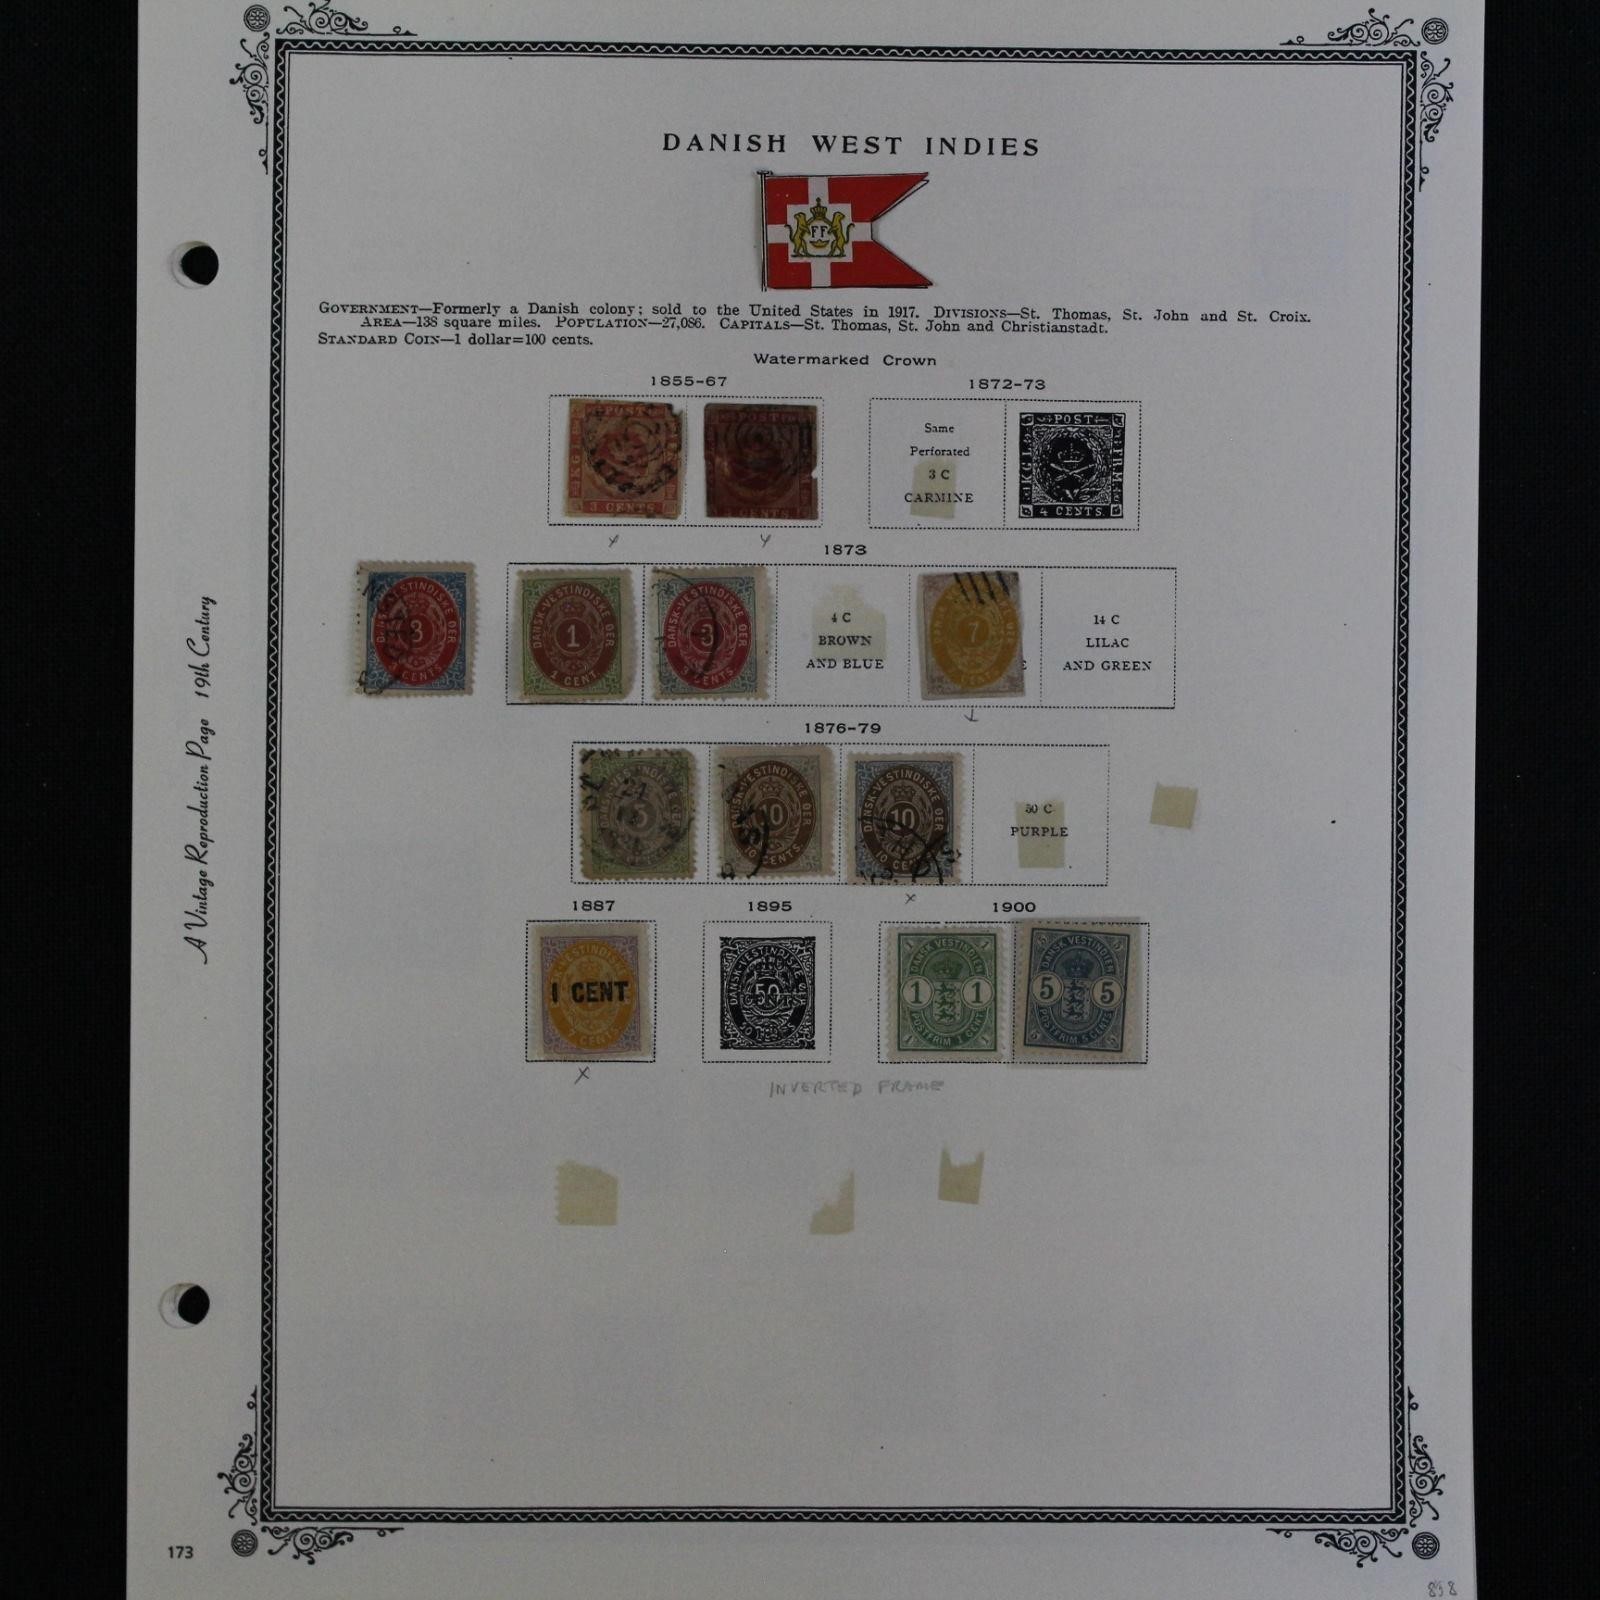 May 30th, 2021 Weekly Stamps & Collectibles Auction